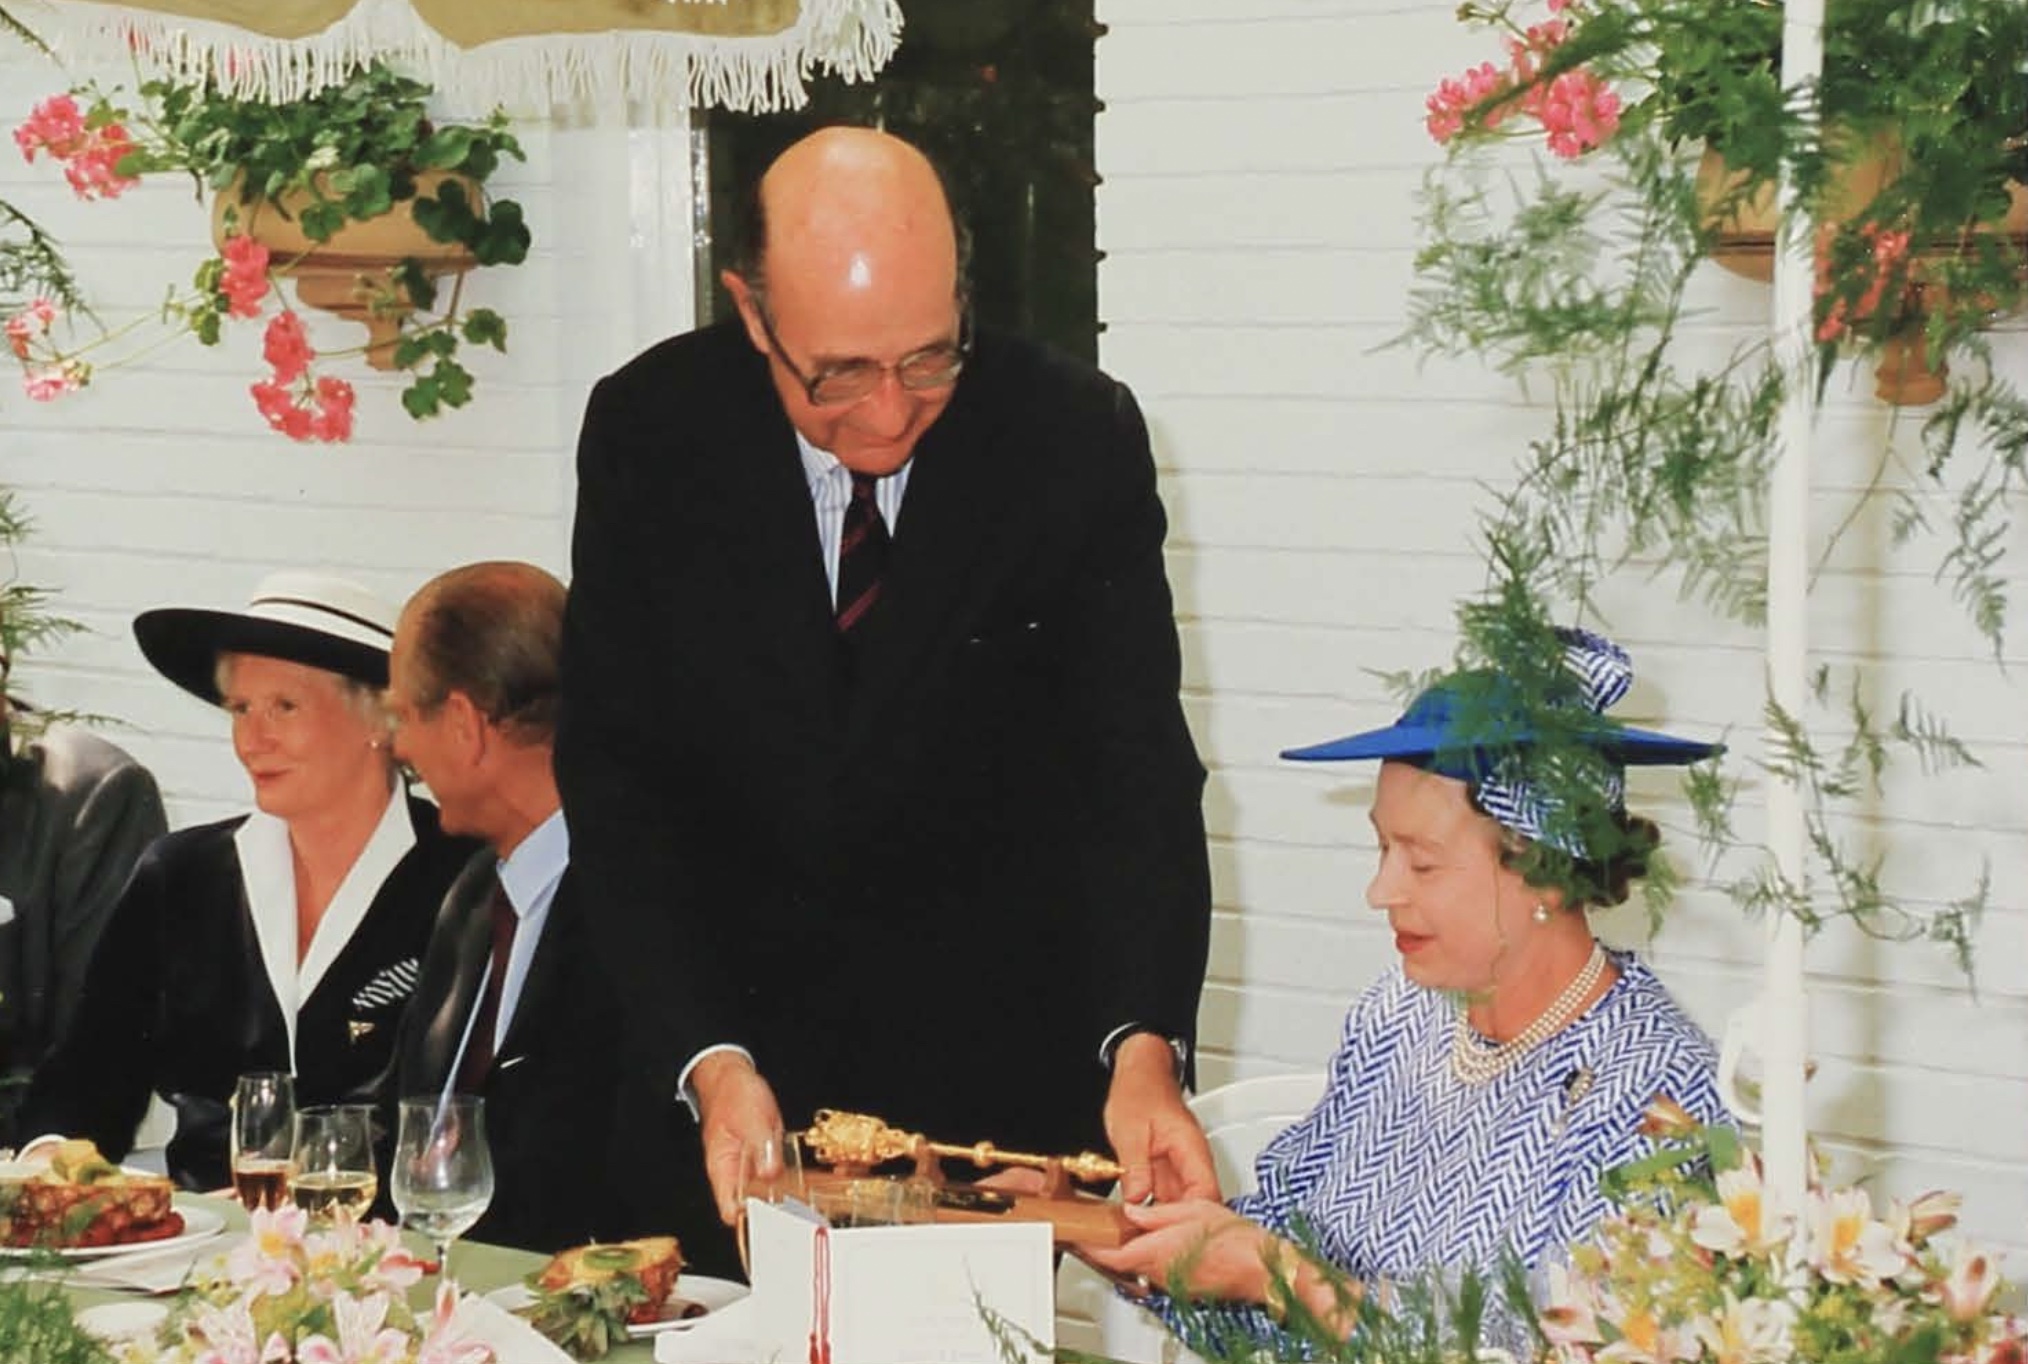 Queen presented with Royal Mace - 1989 - CREDIT: Jersey Heritage